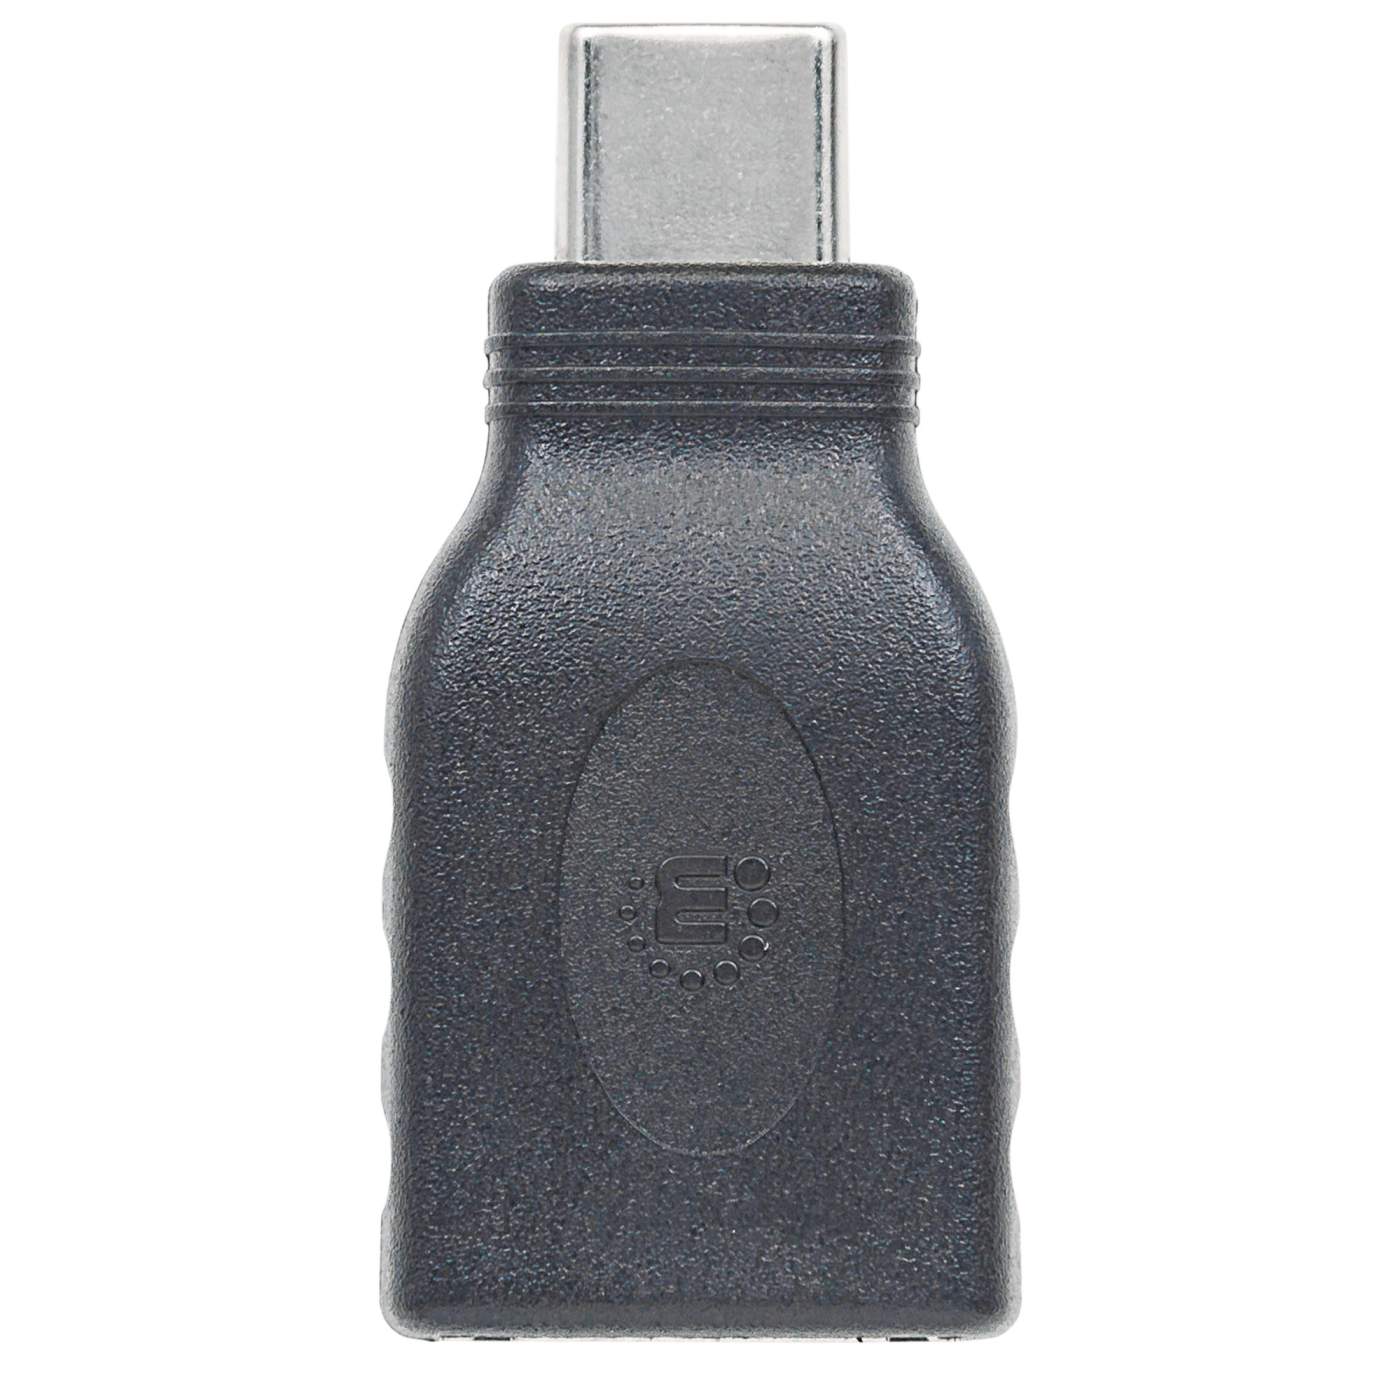 USB-C to USB-A Adapter Image 8